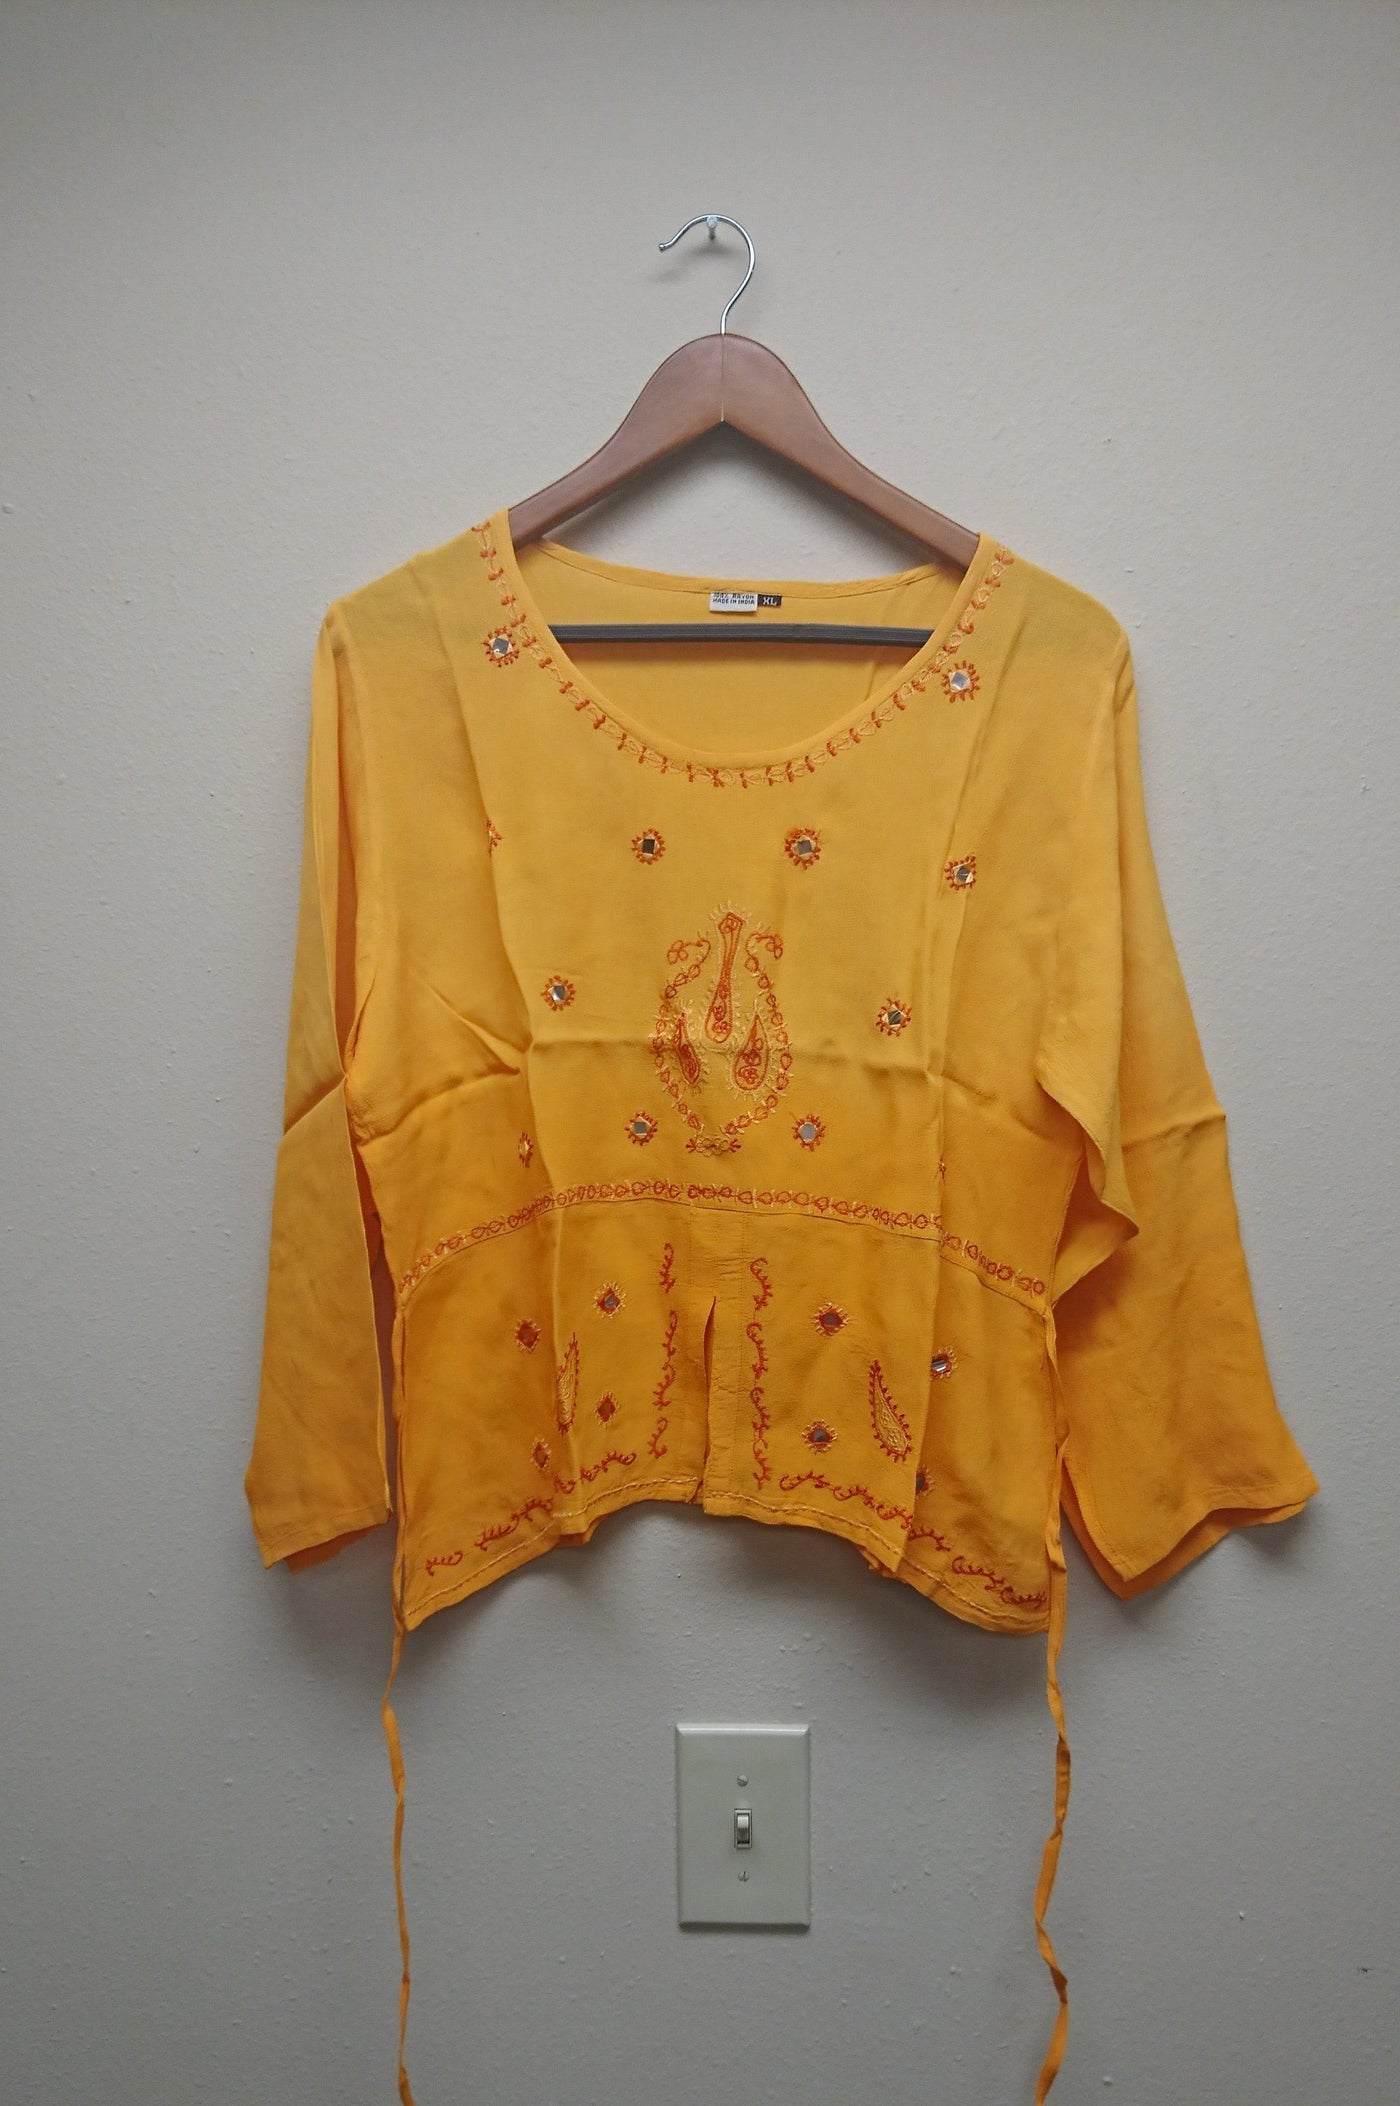 Kurti Blouse Top in Orange Yellow - Indian Clothing in Denver, CO, Aurora, CO, Boulder, CO, Fort Collins, CO, Colorado Springs, CO, Parker, CO, Highlands Ranch, CO, Cherry Creek, CO, Centennial, CO, and Longmont, CO. Nationwide shipping USA - India Fashion X